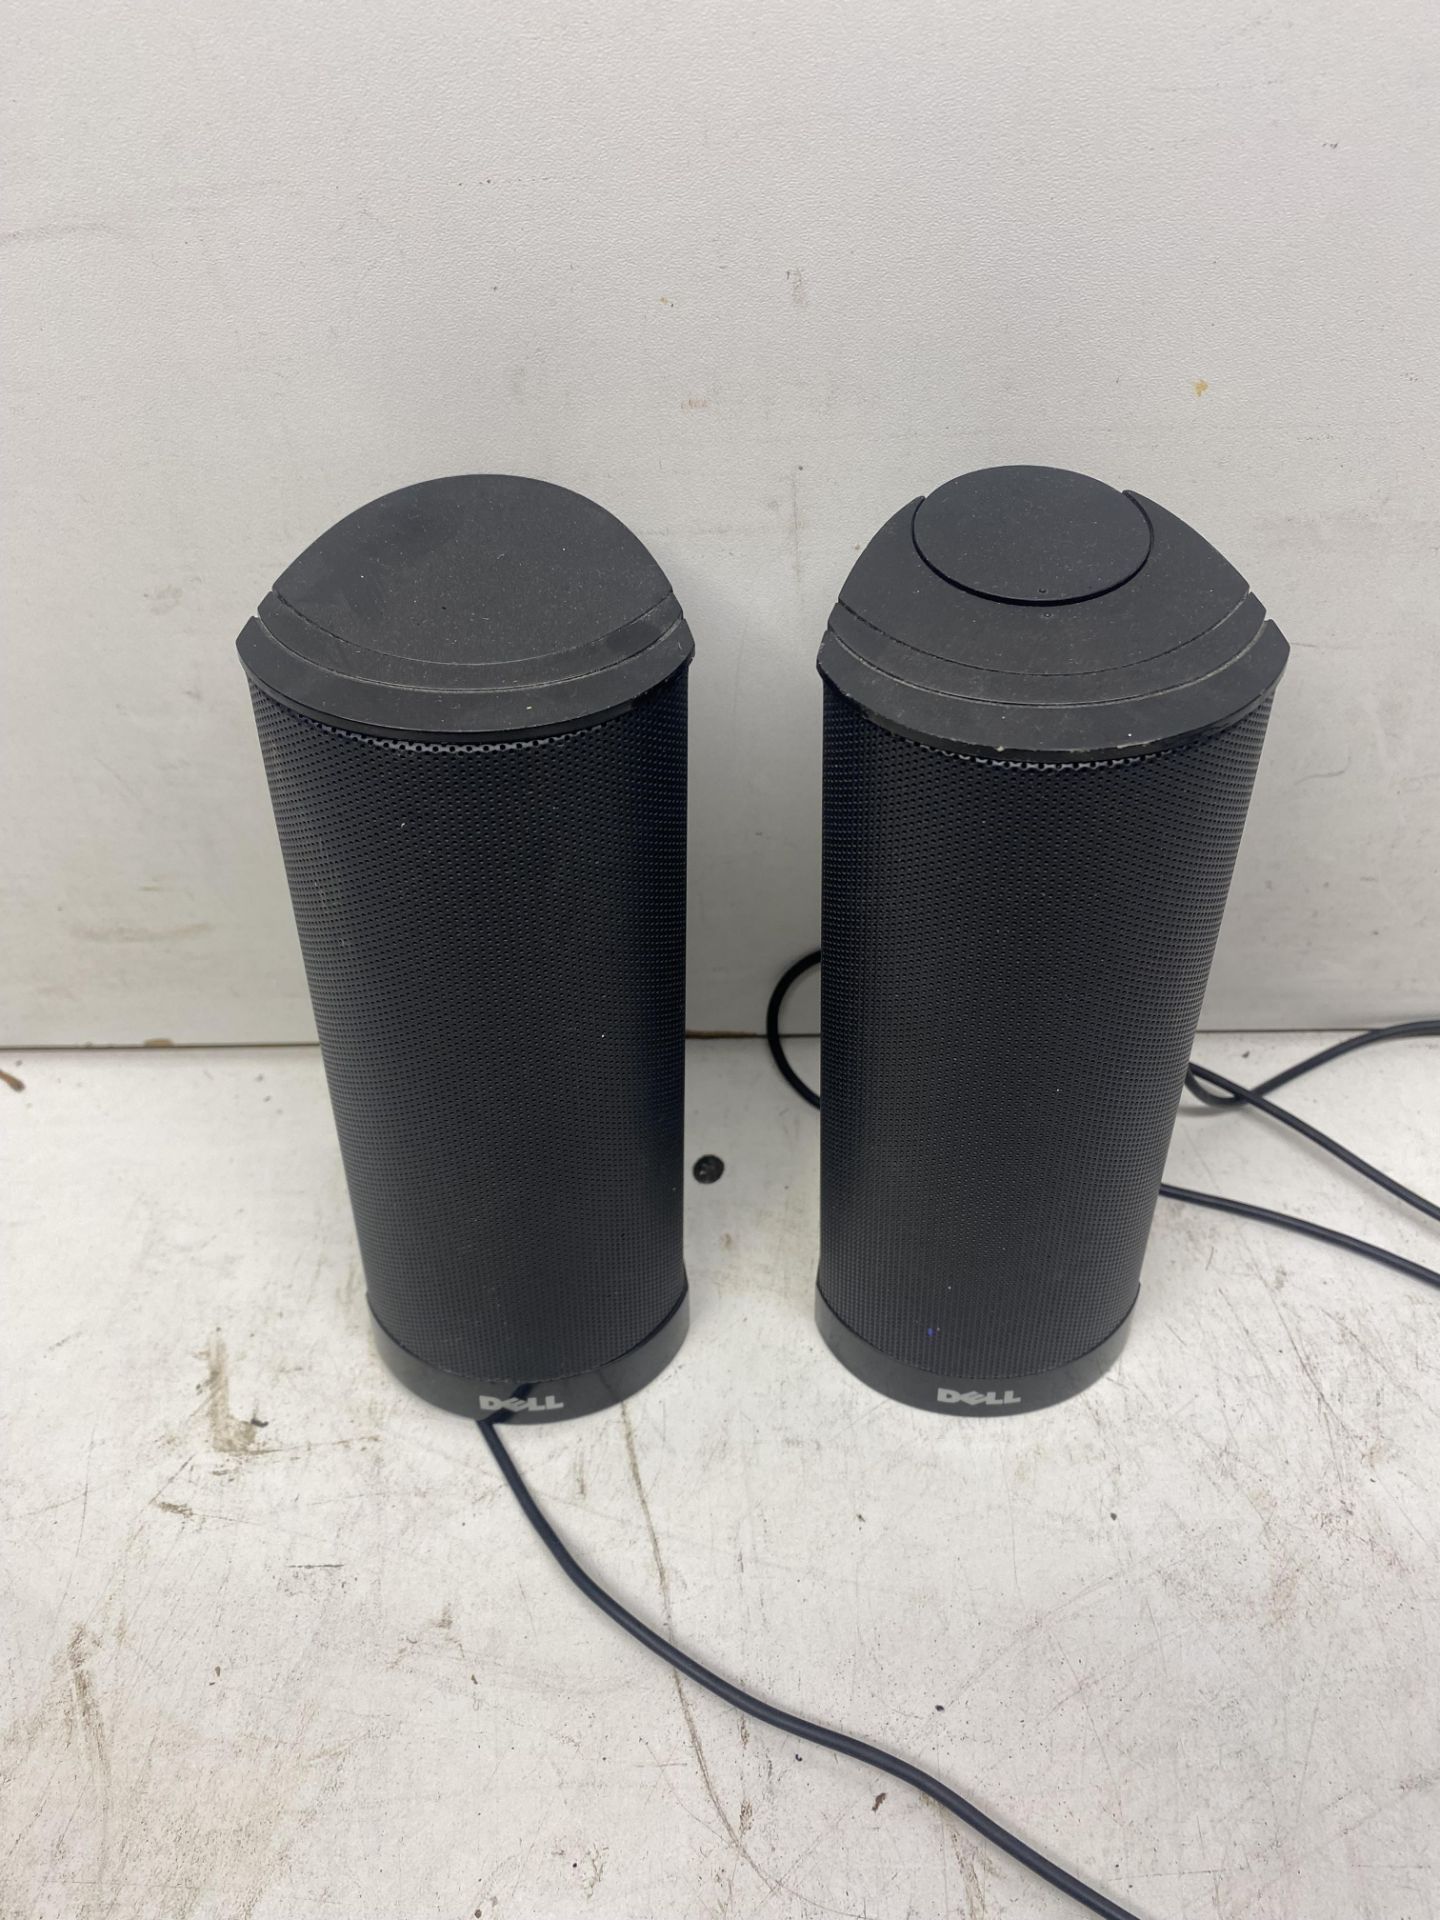 DELL AX210 Speakers for PC - Image 2 of 5